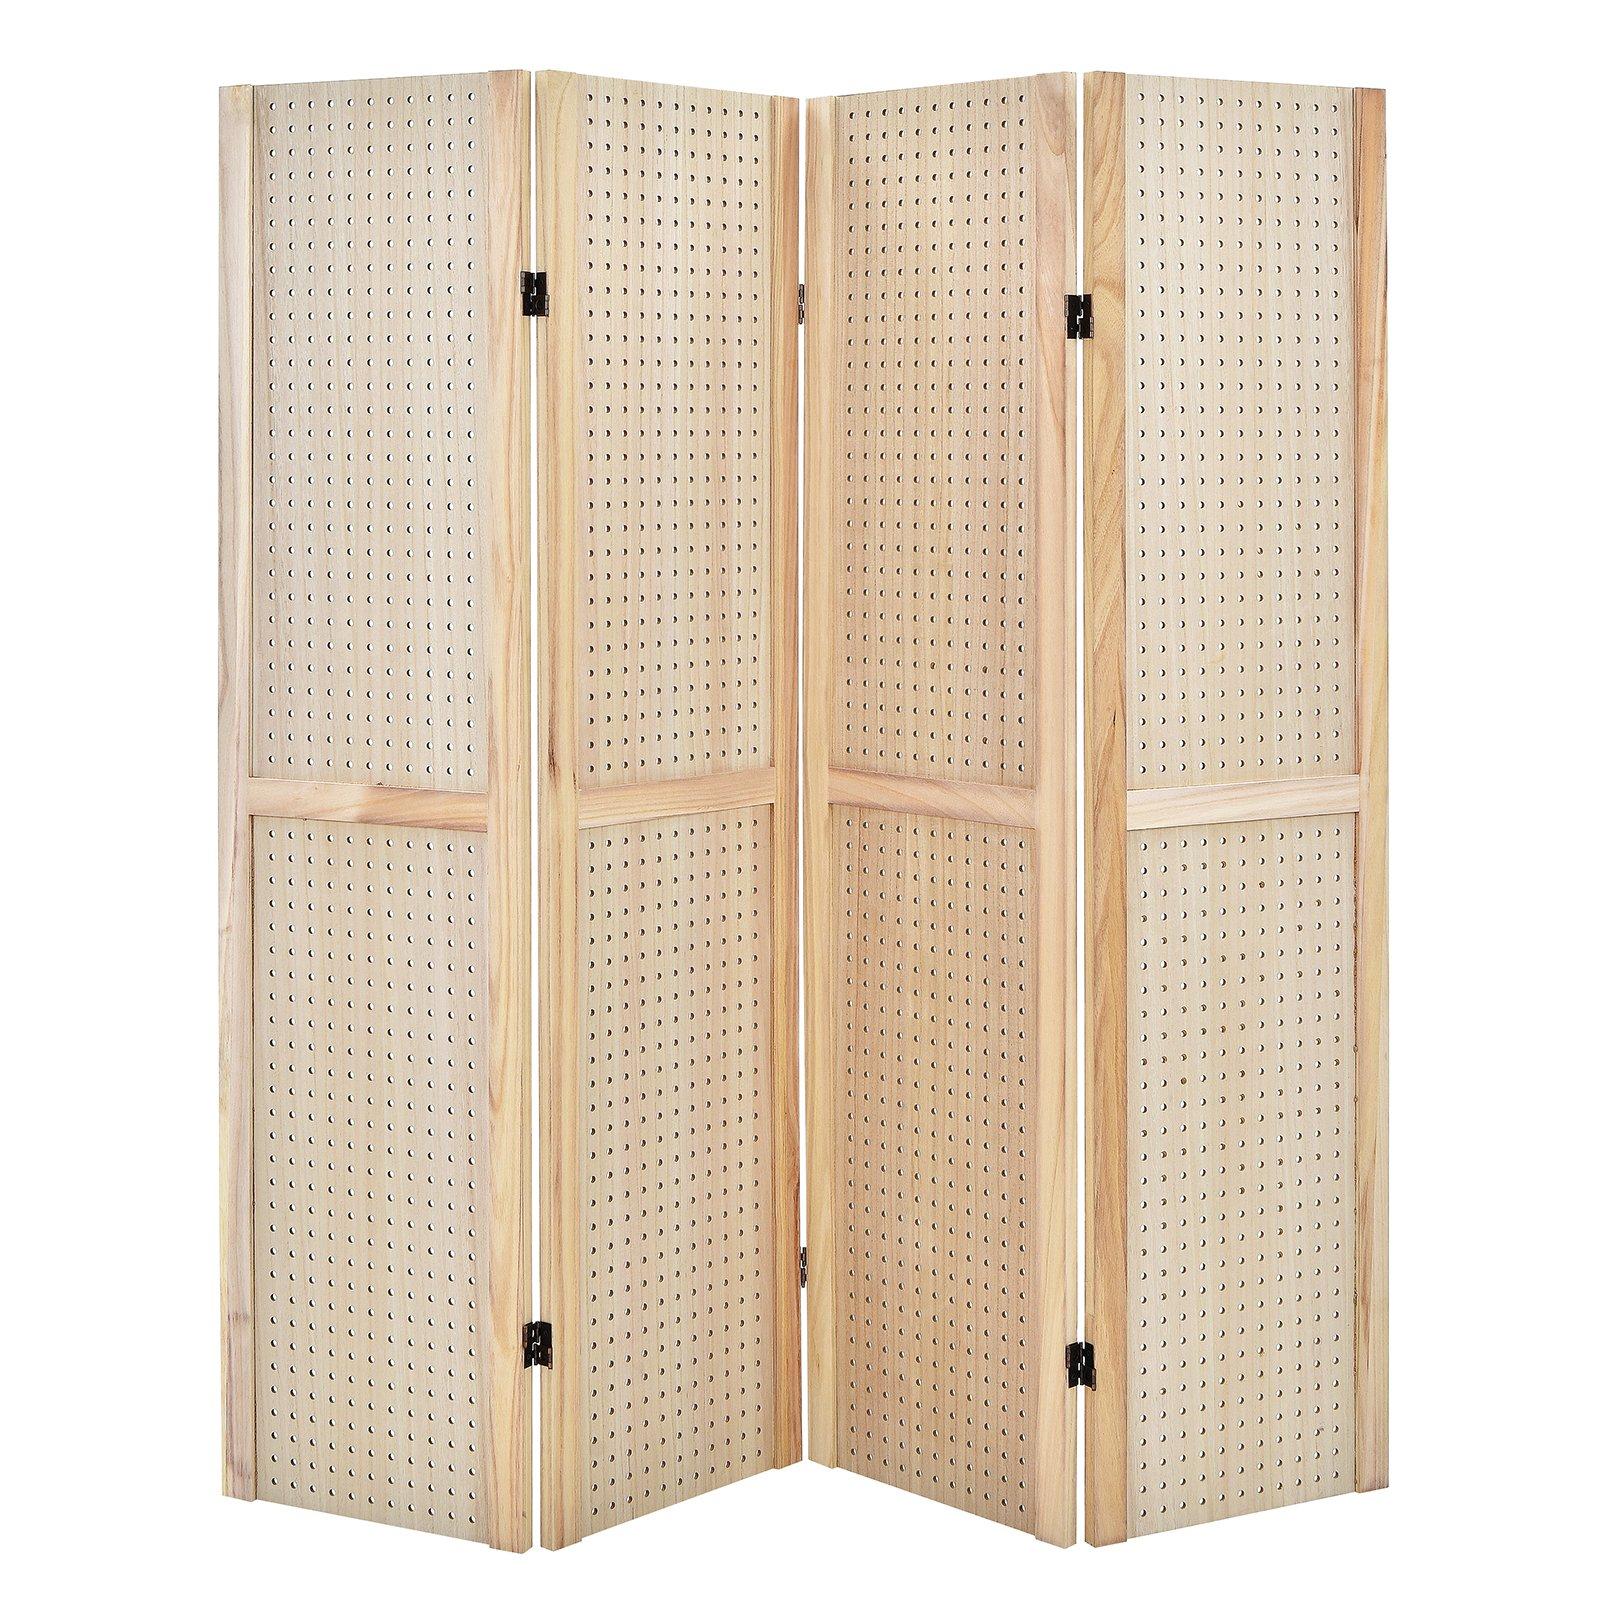 4 Panel Room Divider Wooden Screen Wall Folding Room Partition Separator Privacy